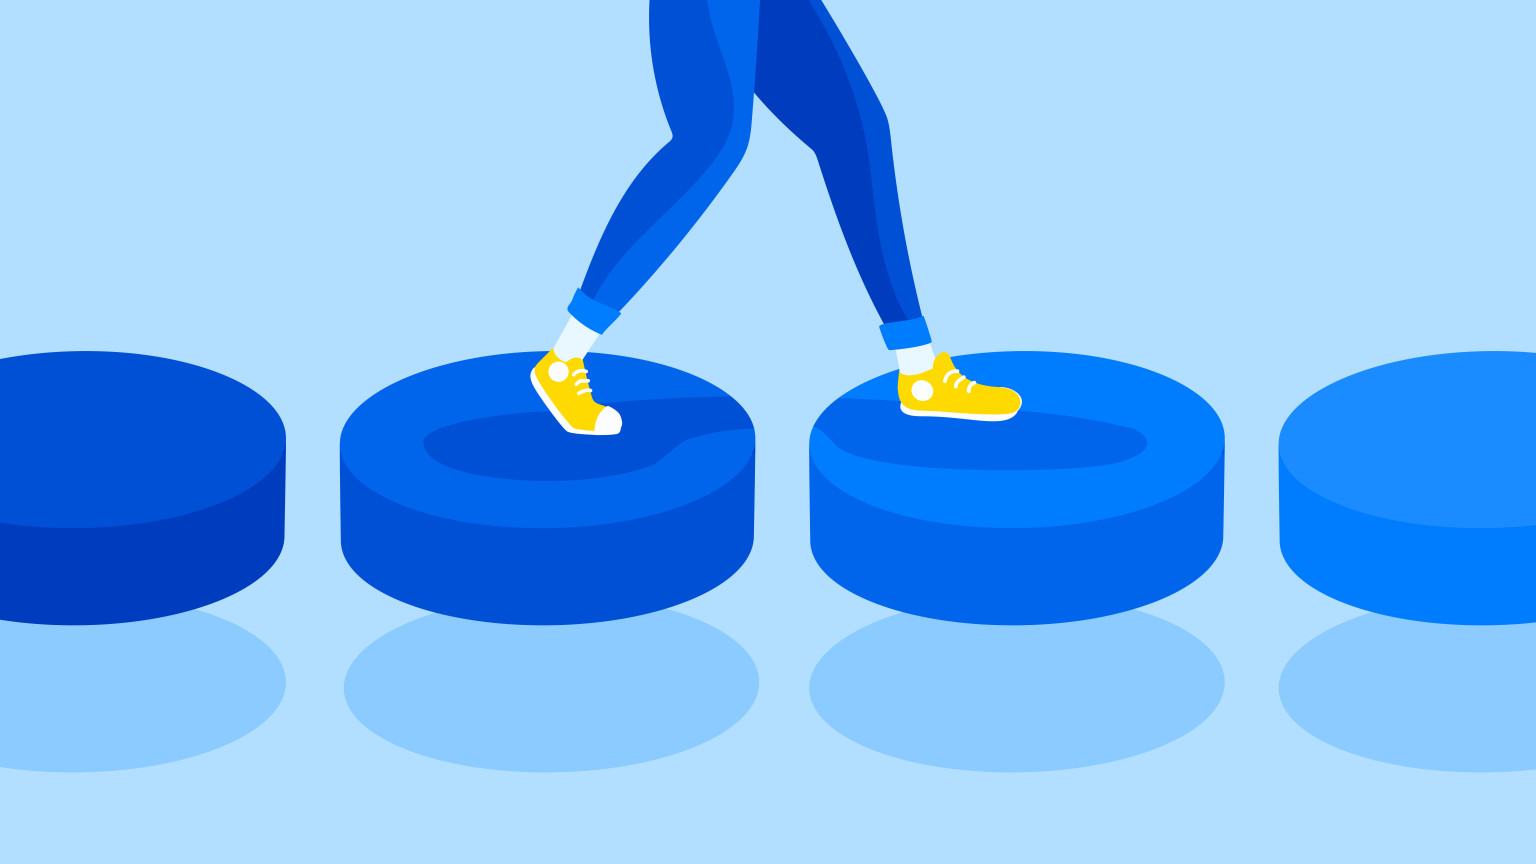 Illustration of a person waling on platforms, signifying steps to adopting a content platform